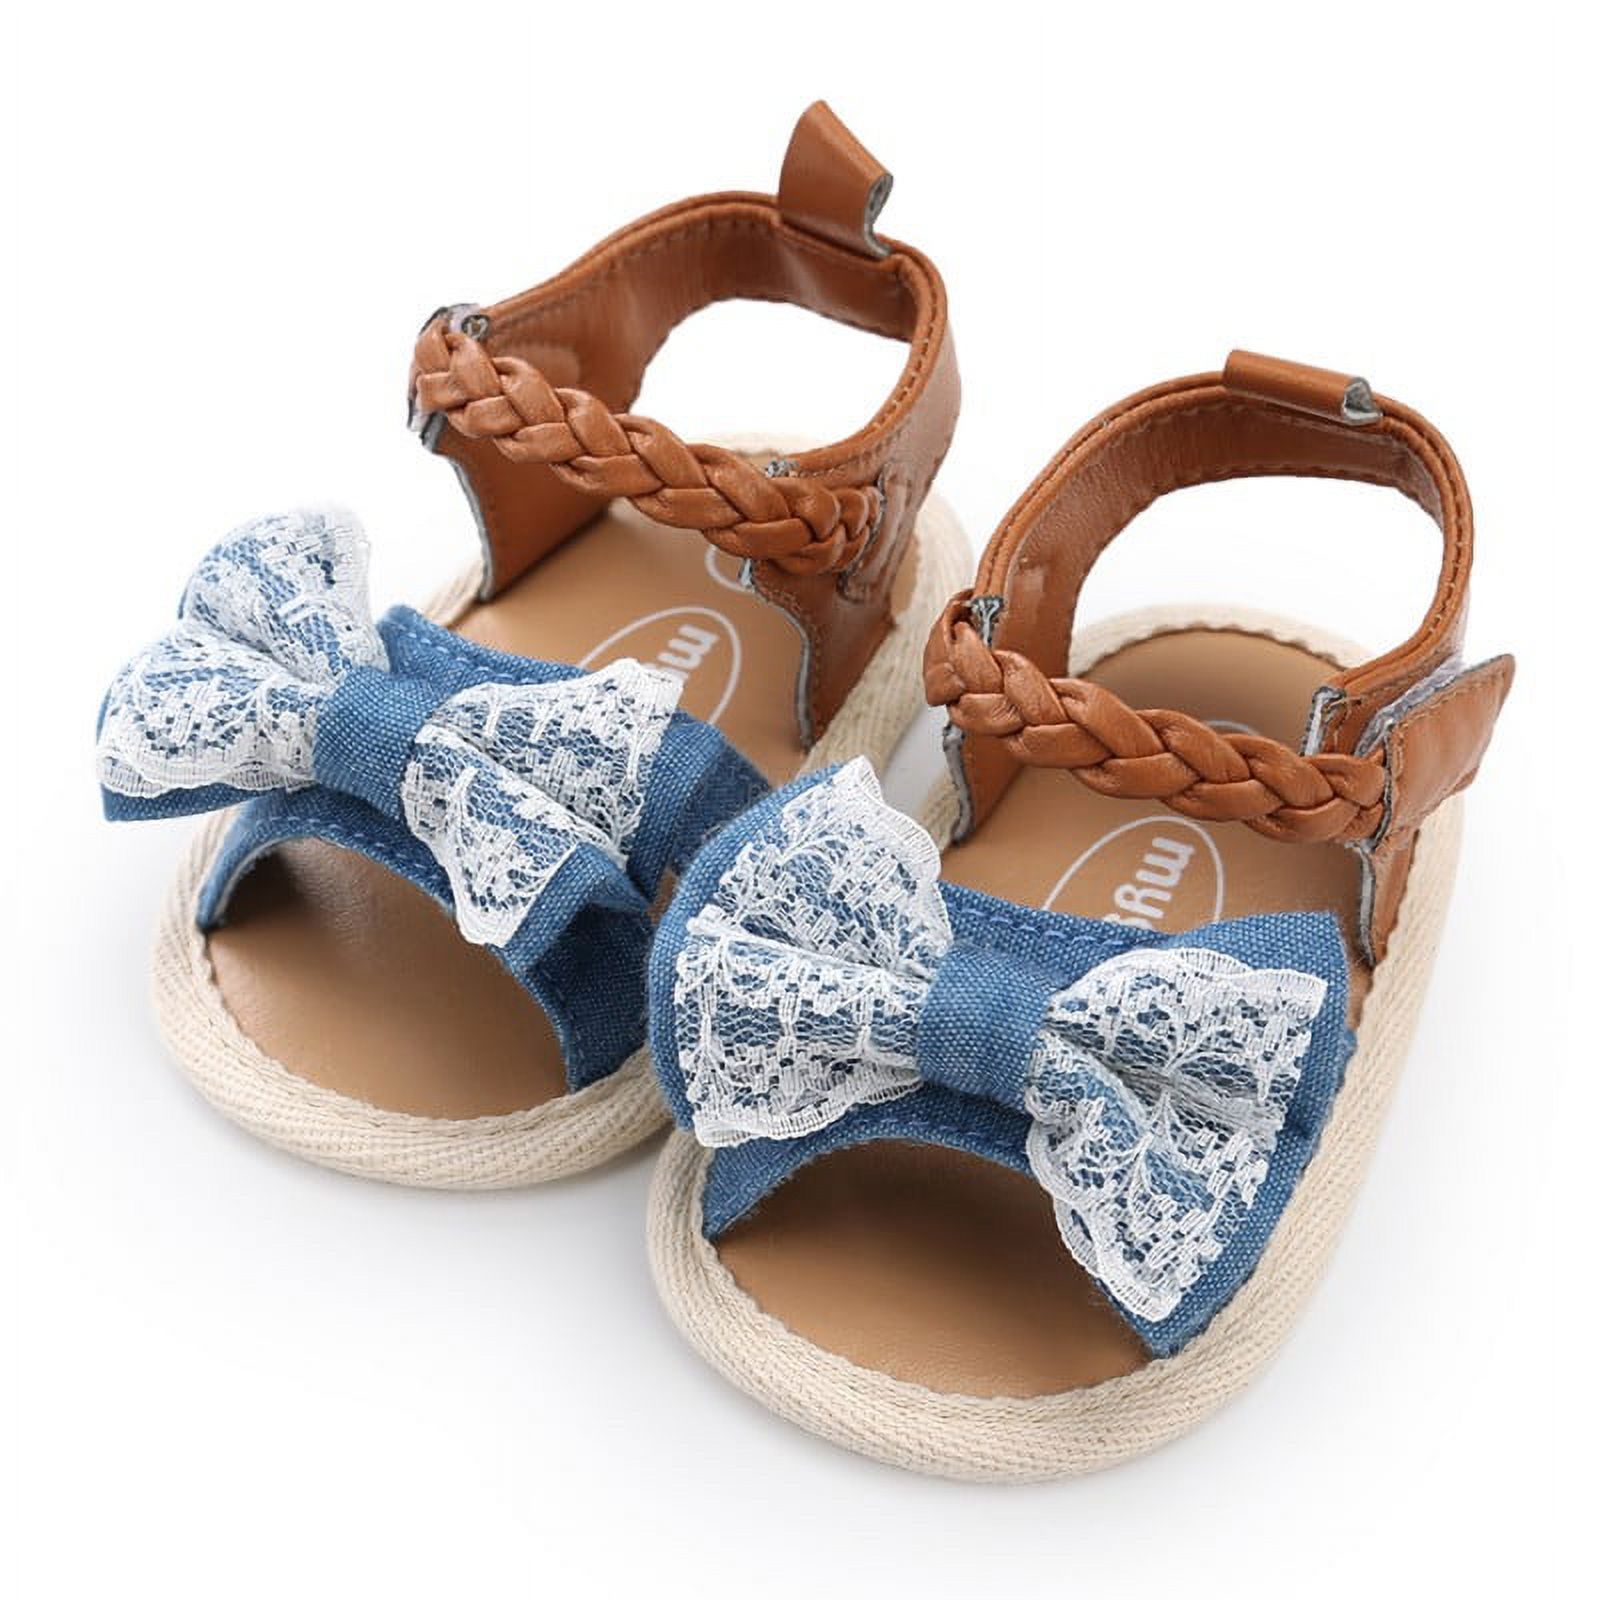 Baby Girls Sandals Summer Shoes Outdoor First Walker Toddler Girls Shoes for Summer - image 4 of 6